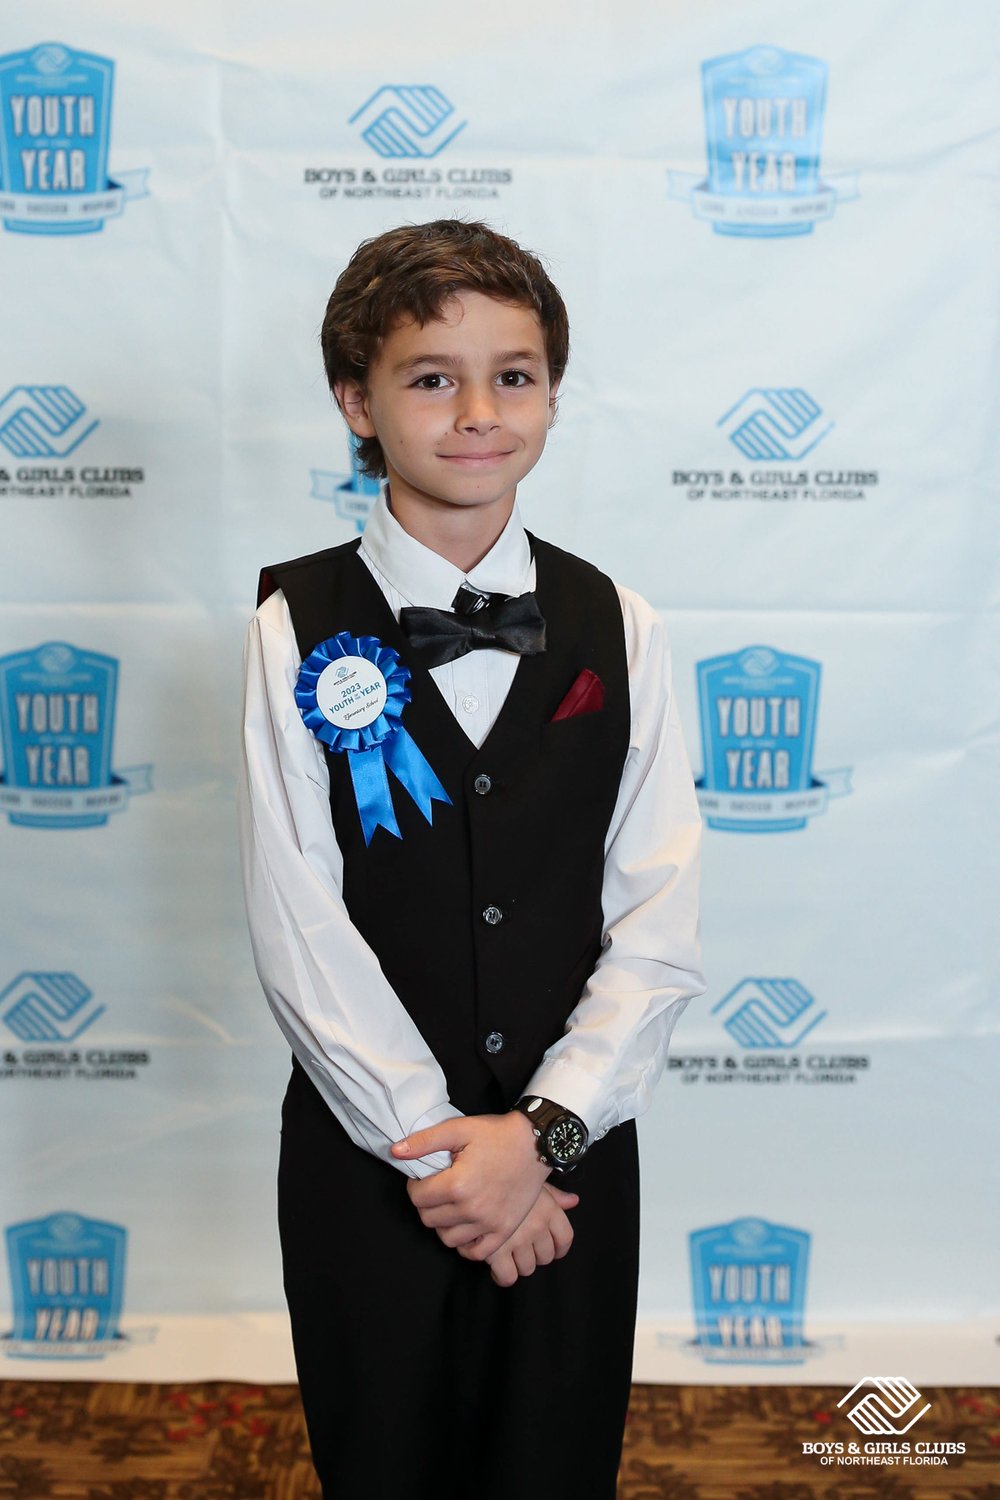 2023 Youth of the Year Awards Ceremony and Alumni Reception- Boys & Girls Clubs of Northeast Florida-30.jpg